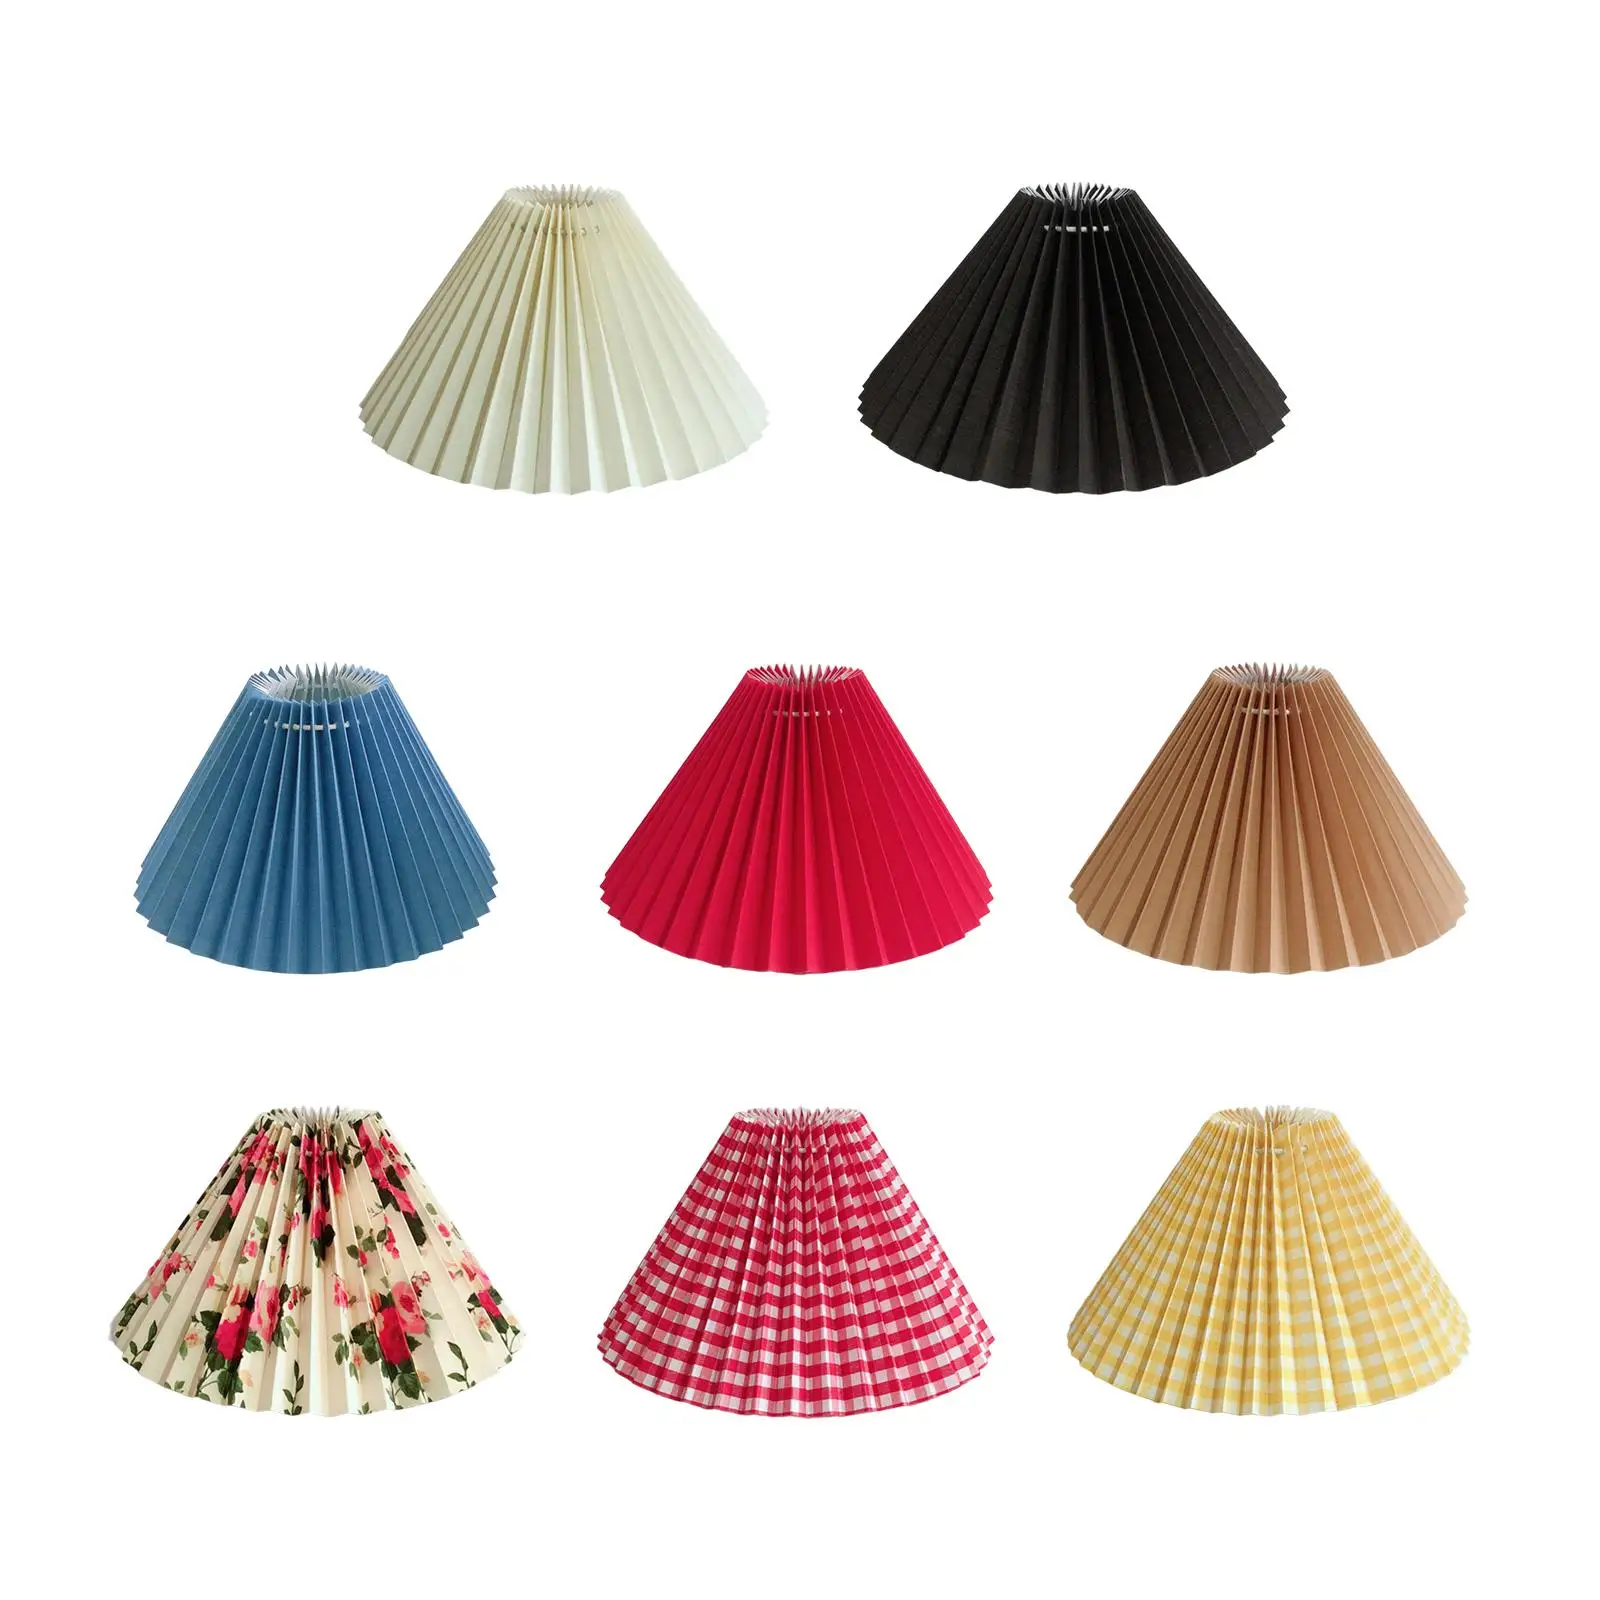 24cm Pleated Lampshade E27 Fabric Lamp Shade Cloth Barrel Clip on Covers